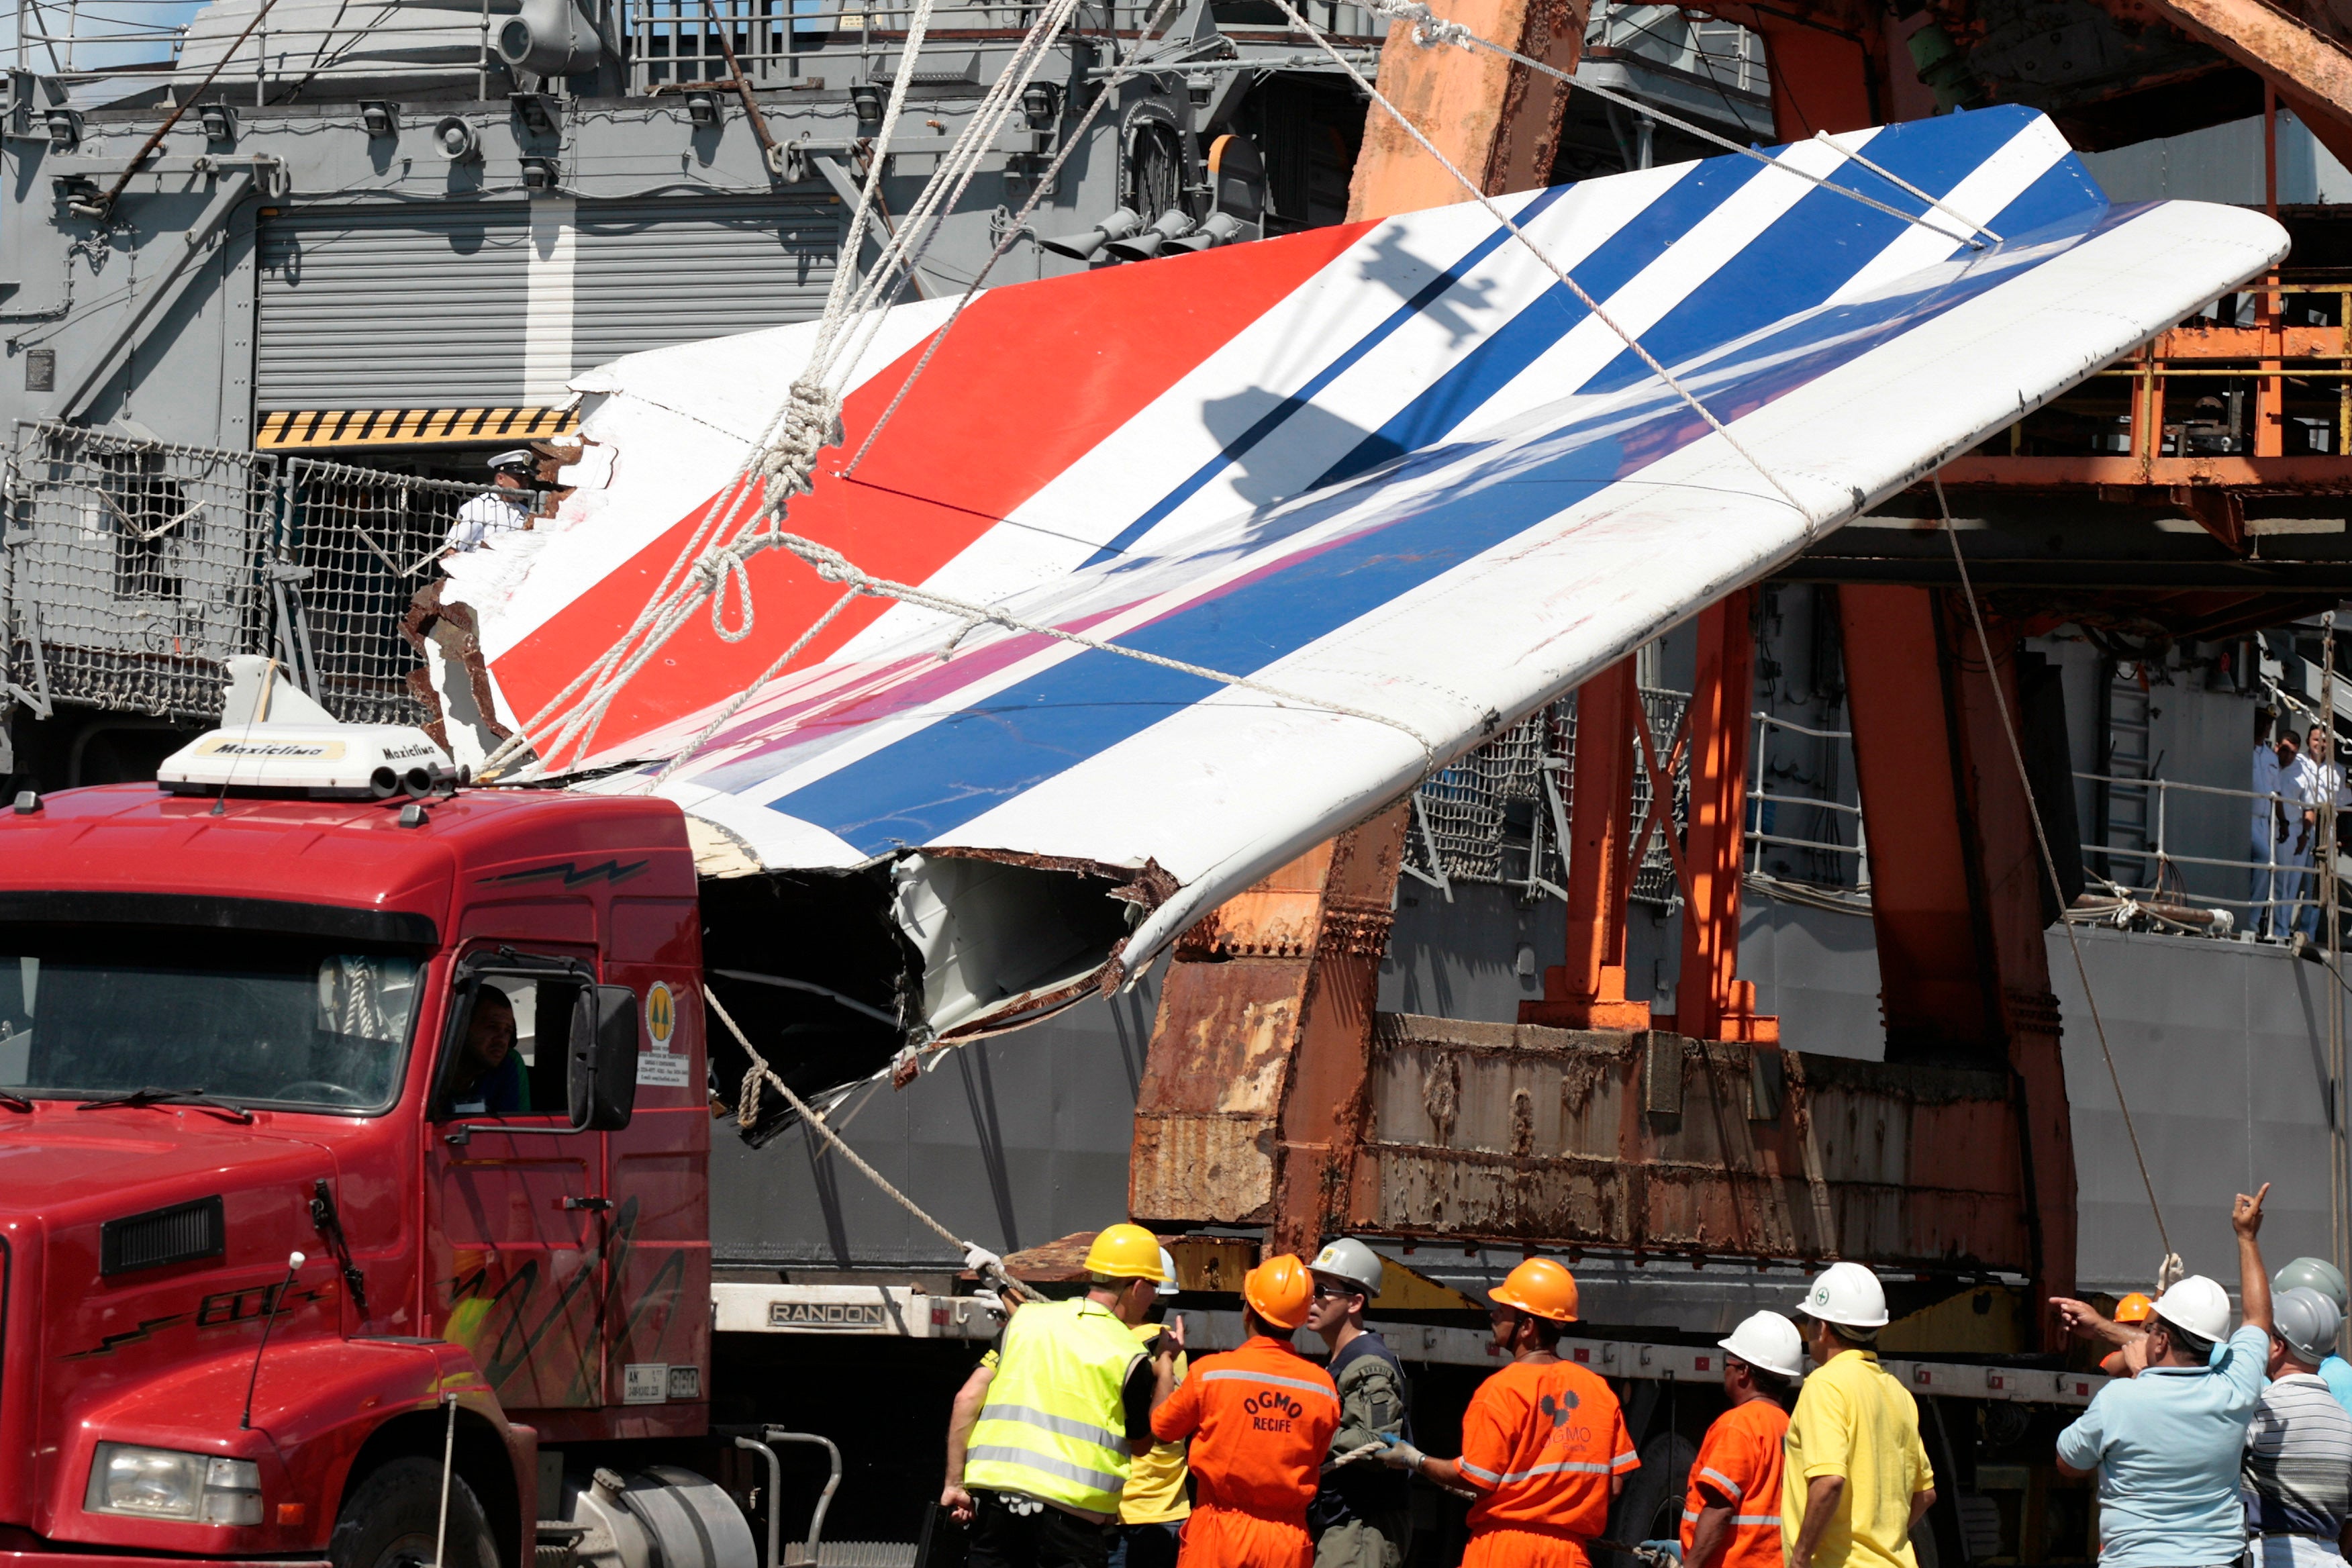 Workers unload debris, belonging to the crashed Air France flight AF447, from the Brazilian Navy’s Constitution Frigate in the port of Recife, northeast of Brazil, June 14, 200